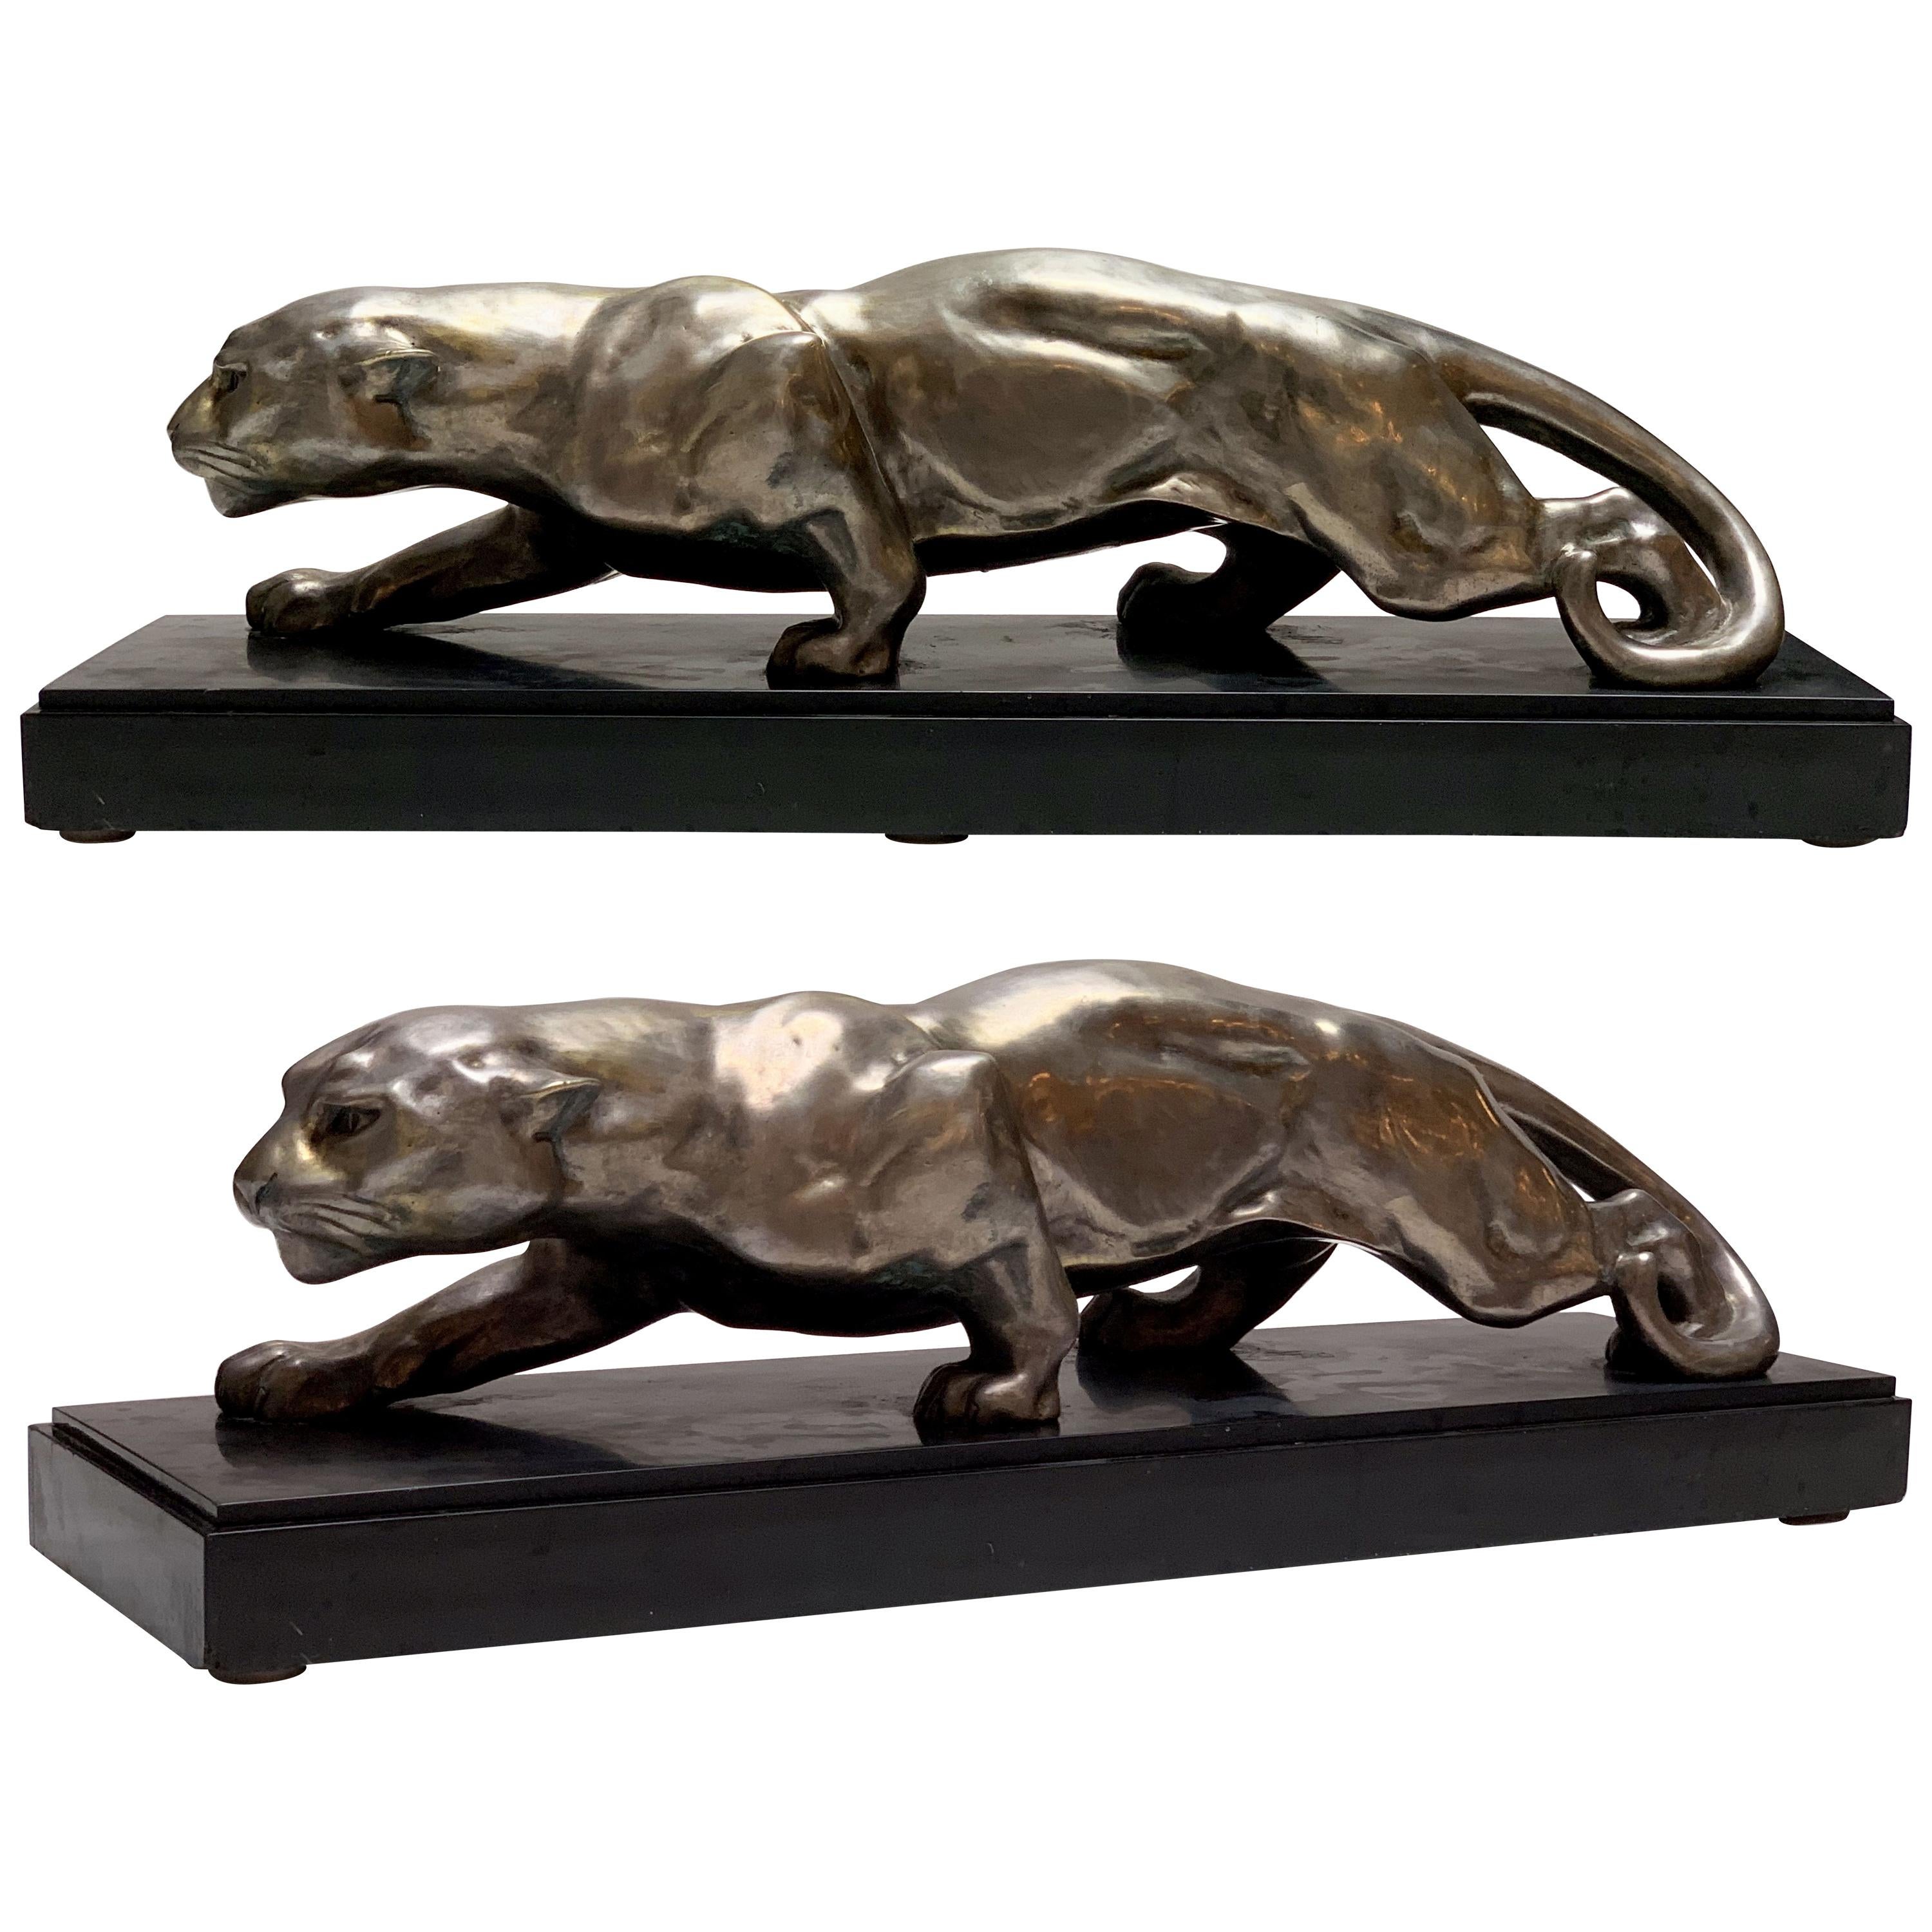 Large French Art Deco Bronze Panther Sculpture on Marble by Deslin